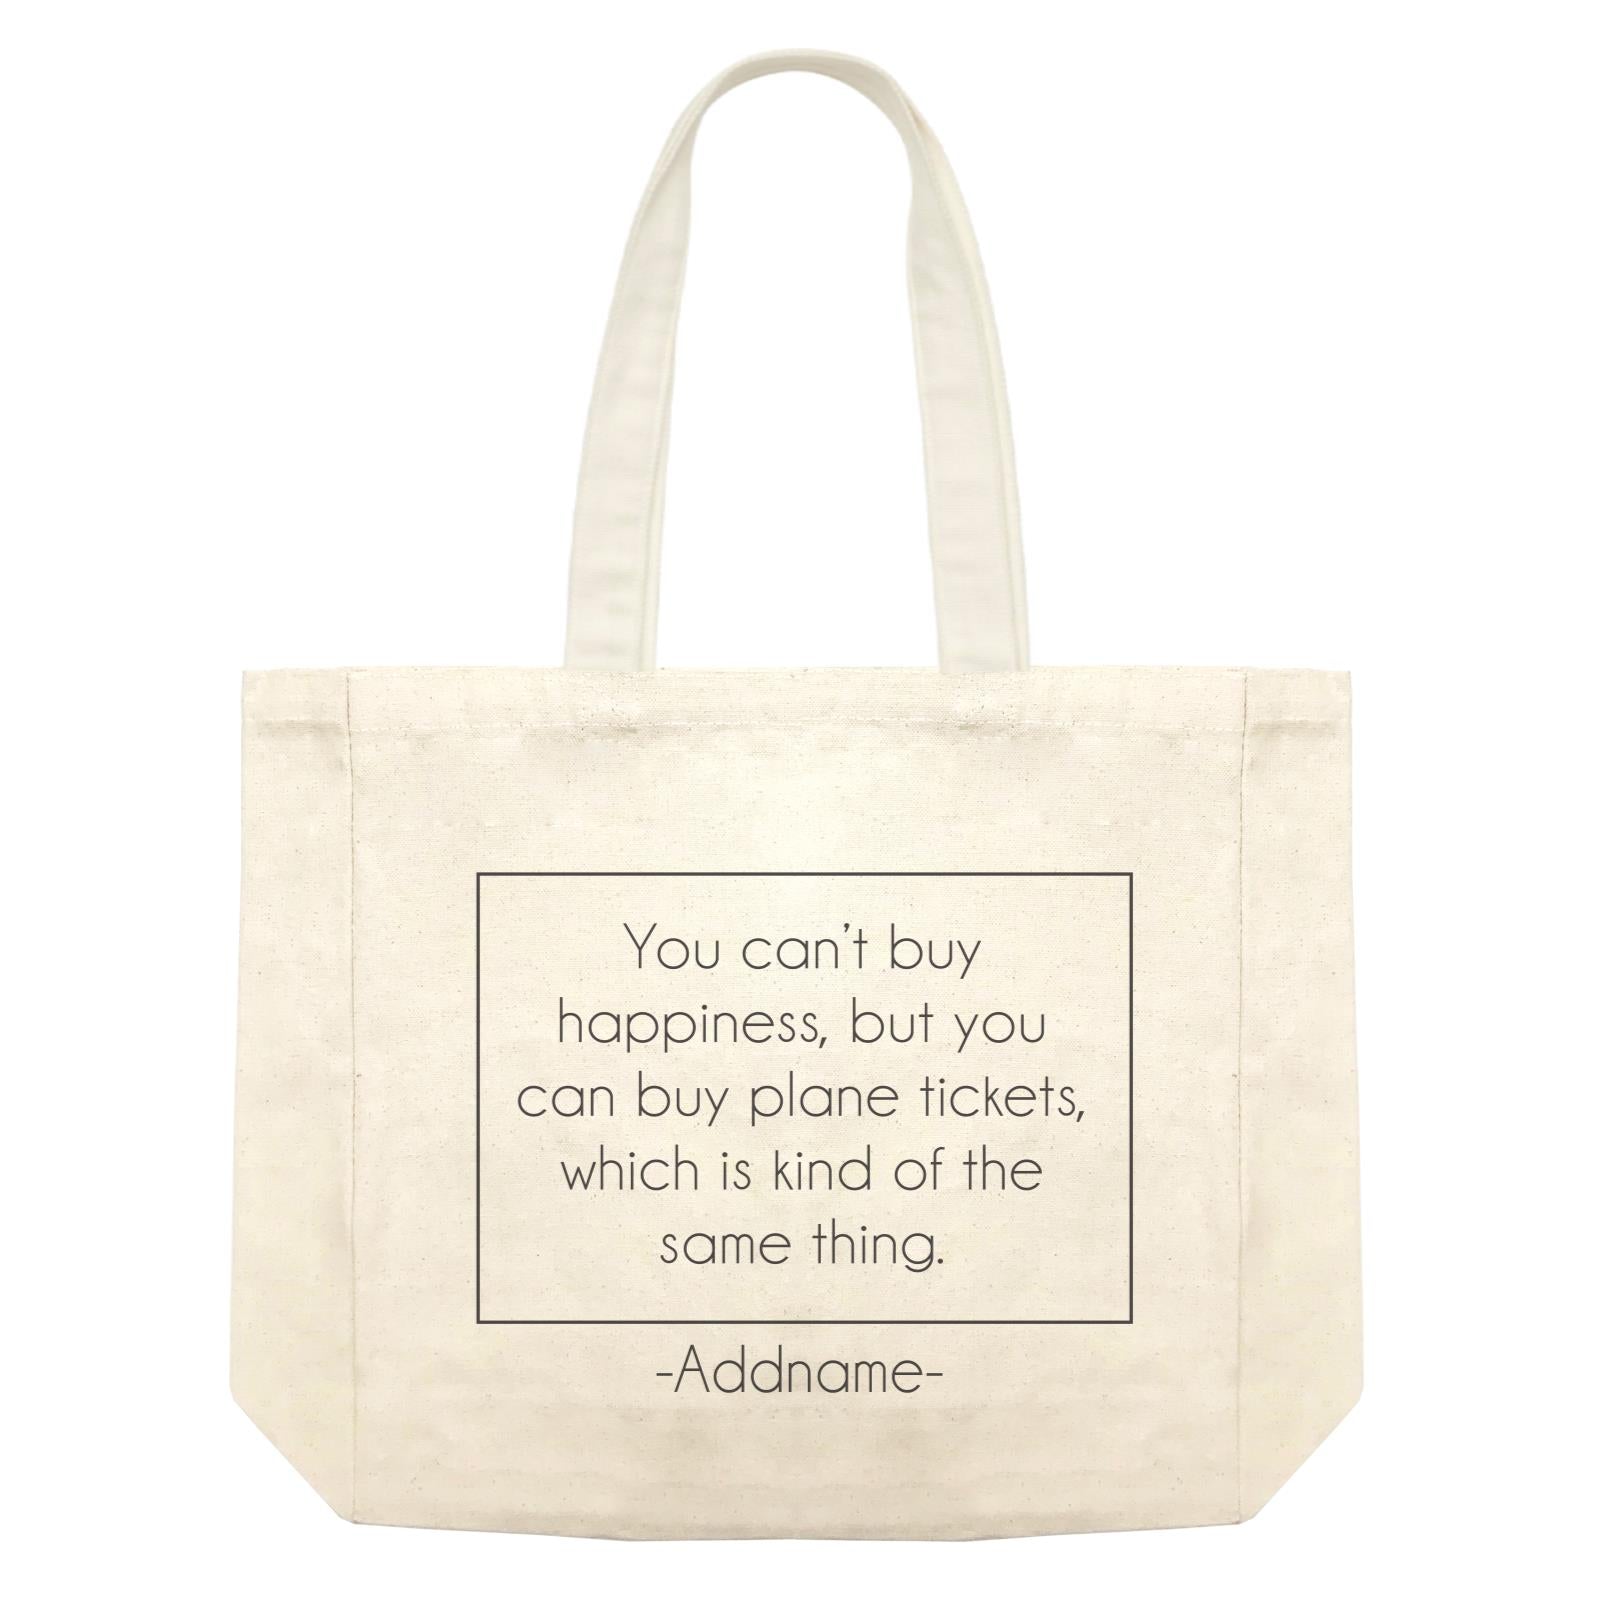 Travel Quotes You Can't Buy Happiness But You Can Buy Plane Tickets Addname Shopping Bag